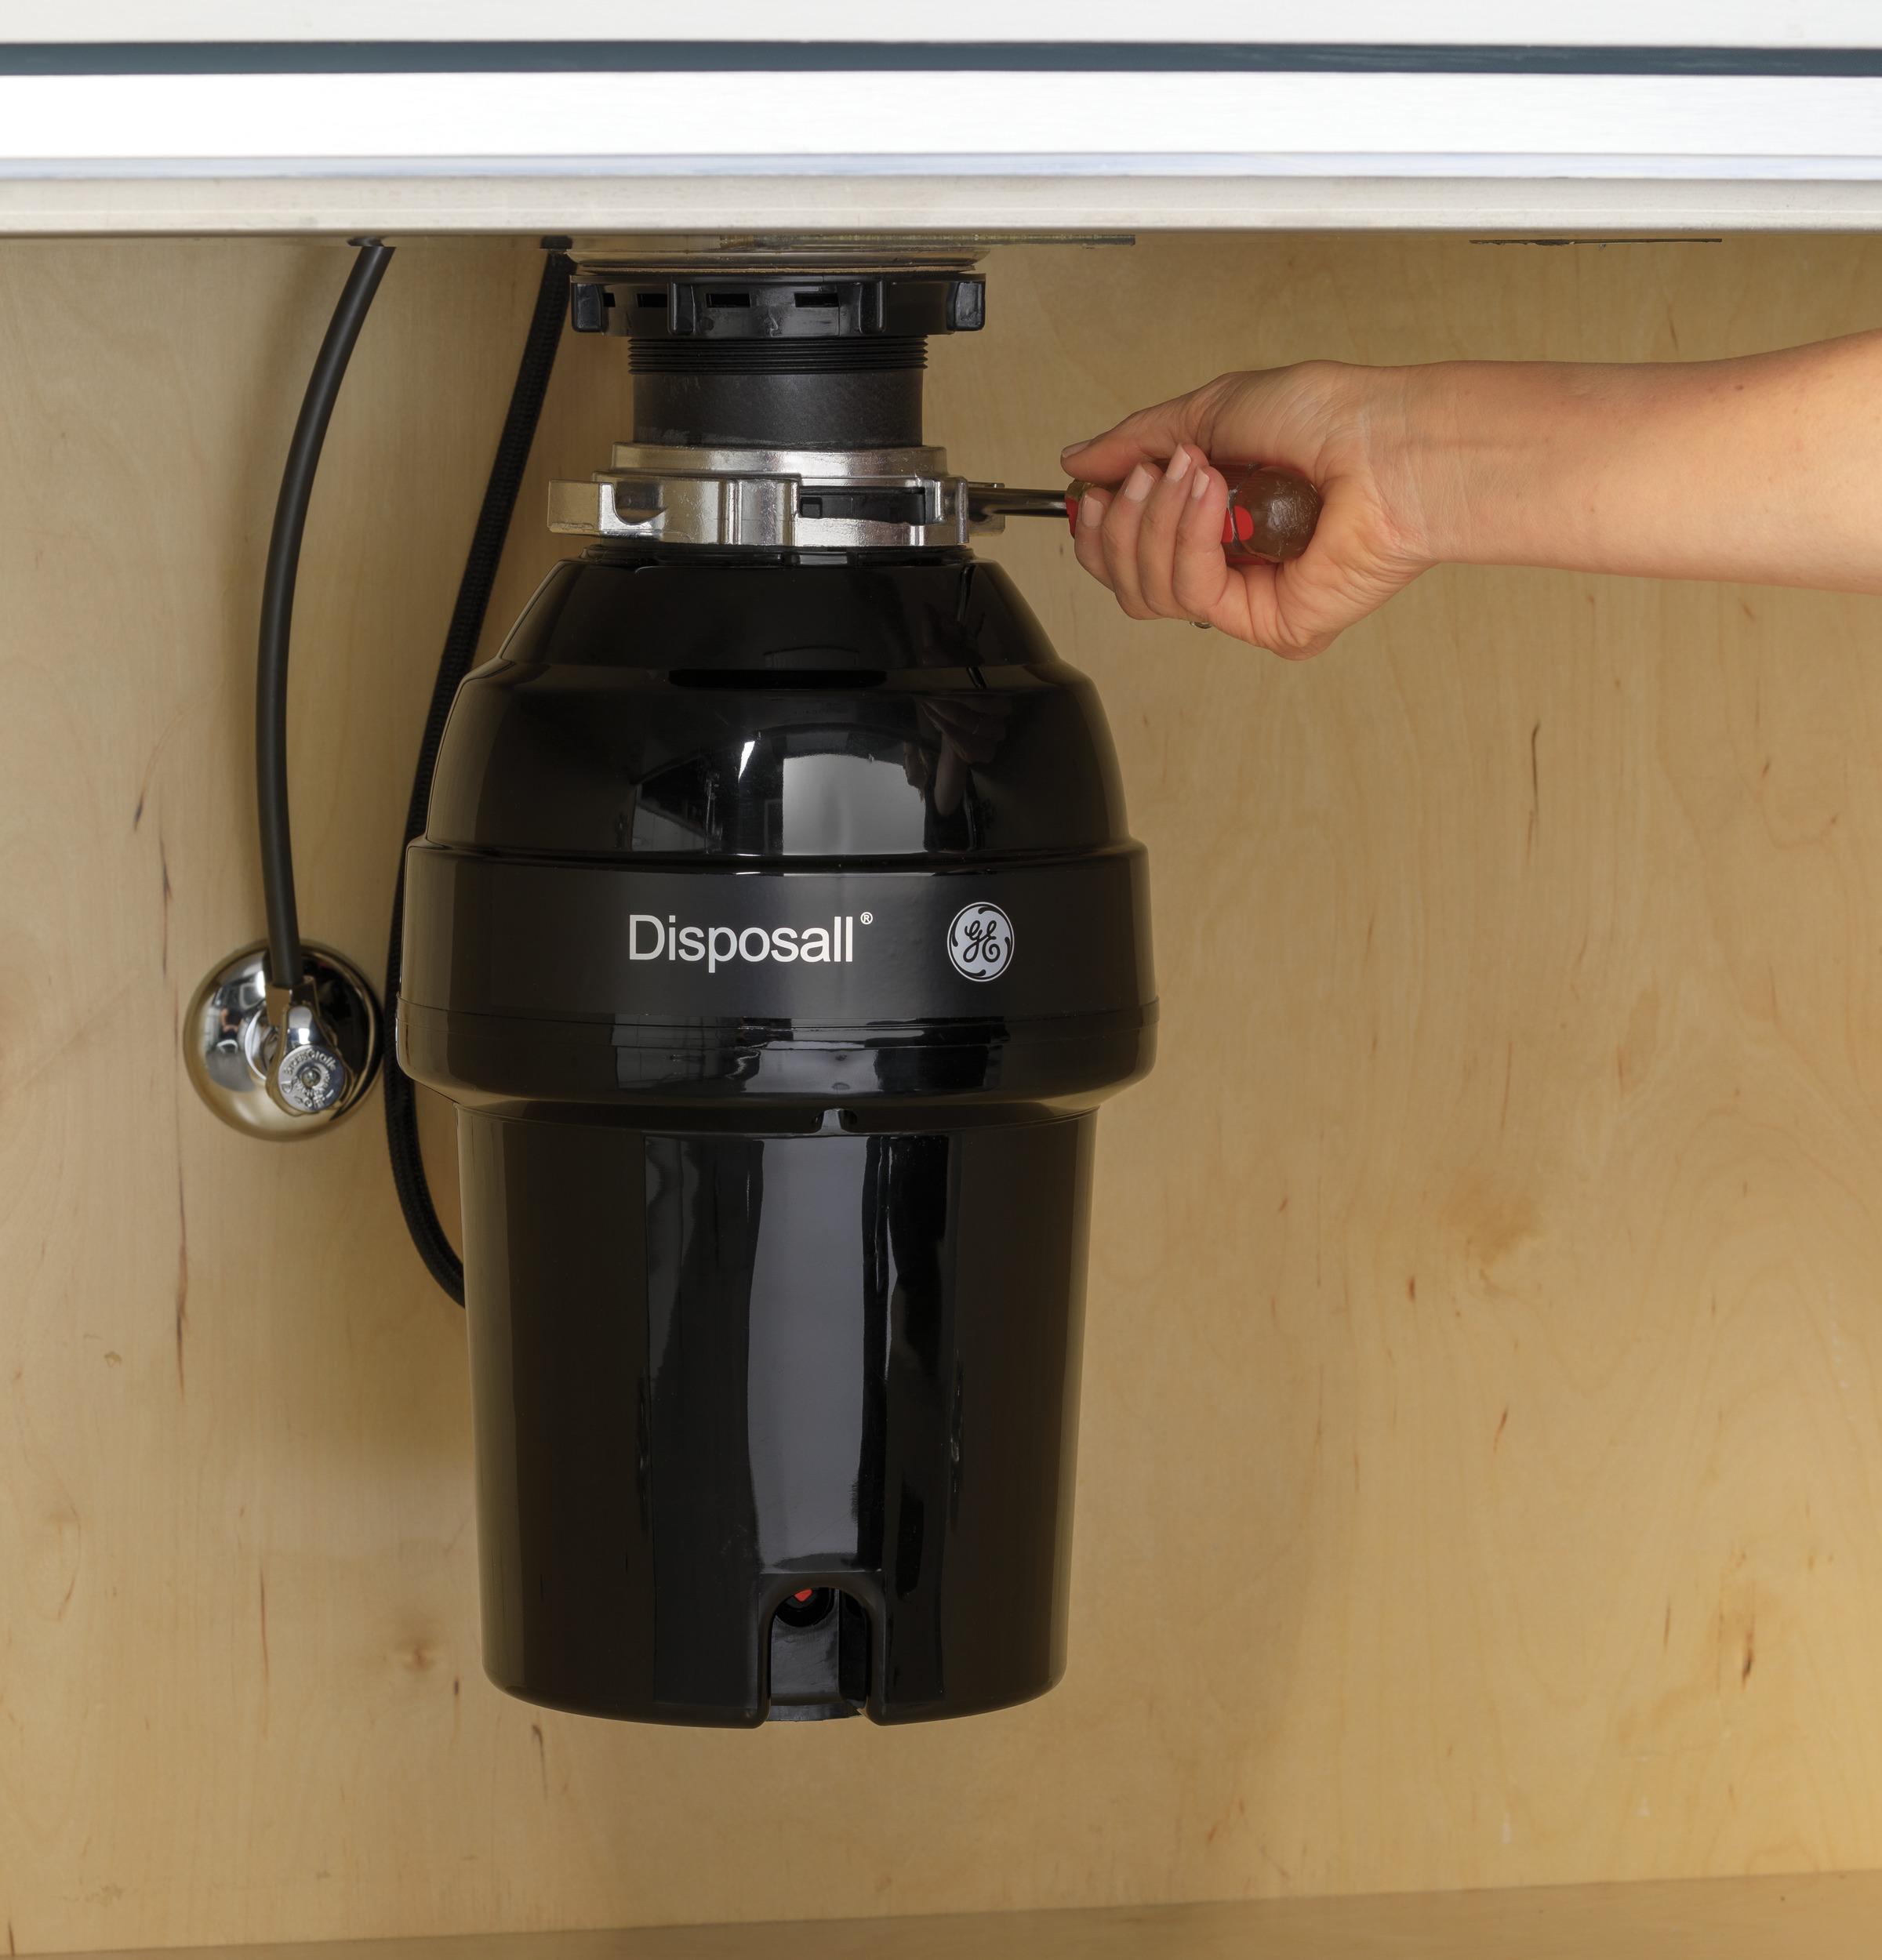 GE DISPOSALL® 3/4 HP Continuous Feed Garbage Disposer - Non-Corded